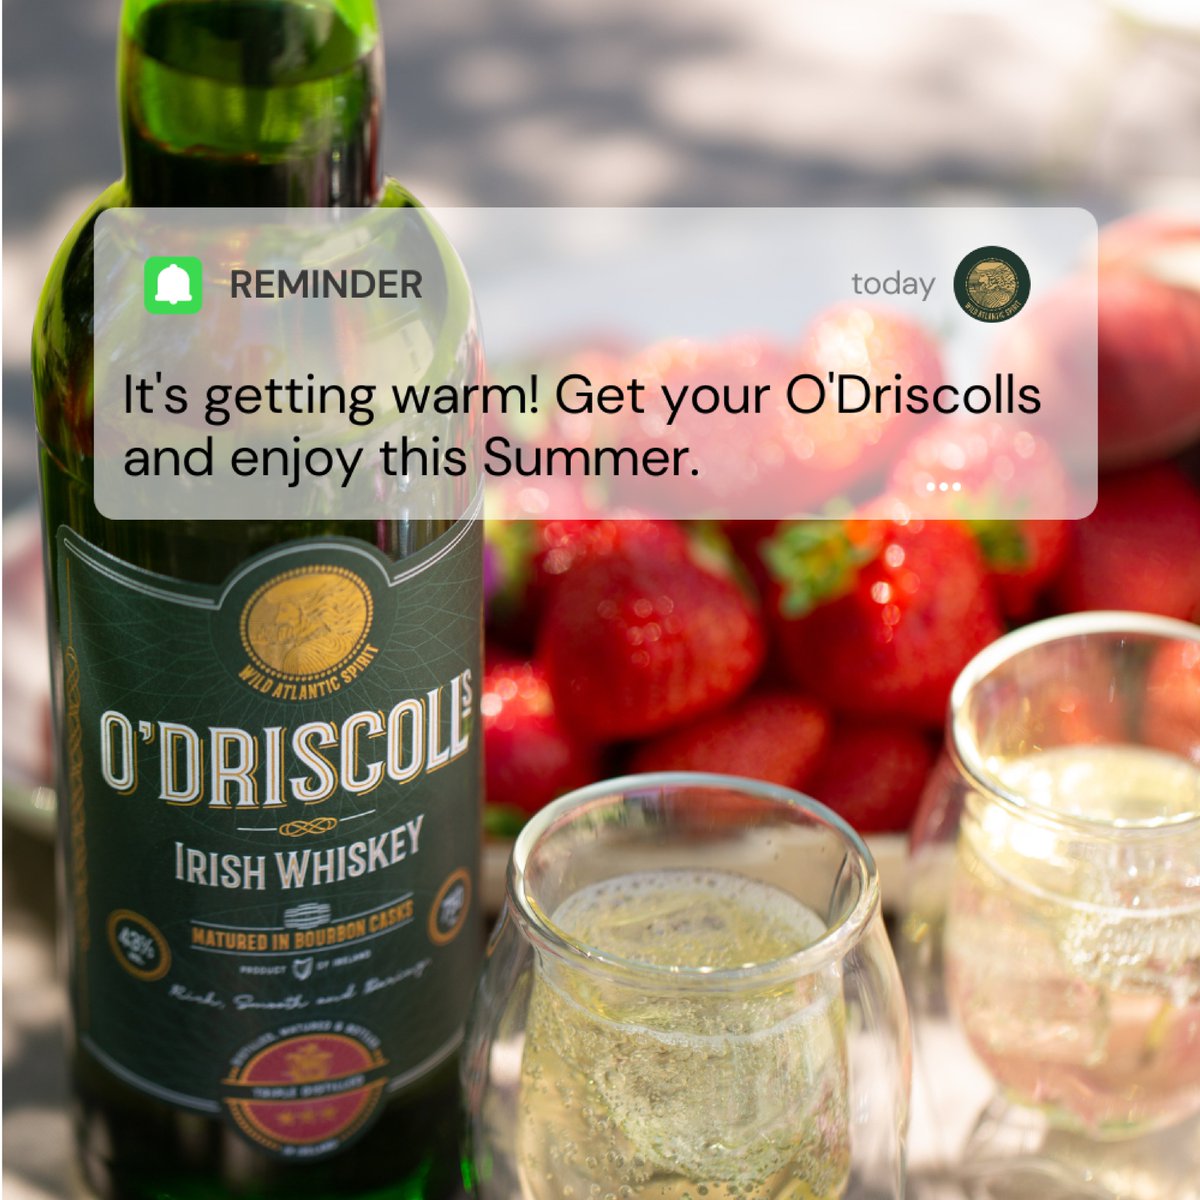 Summer too hot to handle? Enjoy sipping an O'Driscolls with a gingerale on the rocks in the shade. Cheers! 🇮🇪 🥃🏴‍☠️ 🖱Visit: odriscollsirishwhiskey.com #odriscollsirishwhiskey #odriscollsclan #irishwhiskey #whiskeylovers #ireland